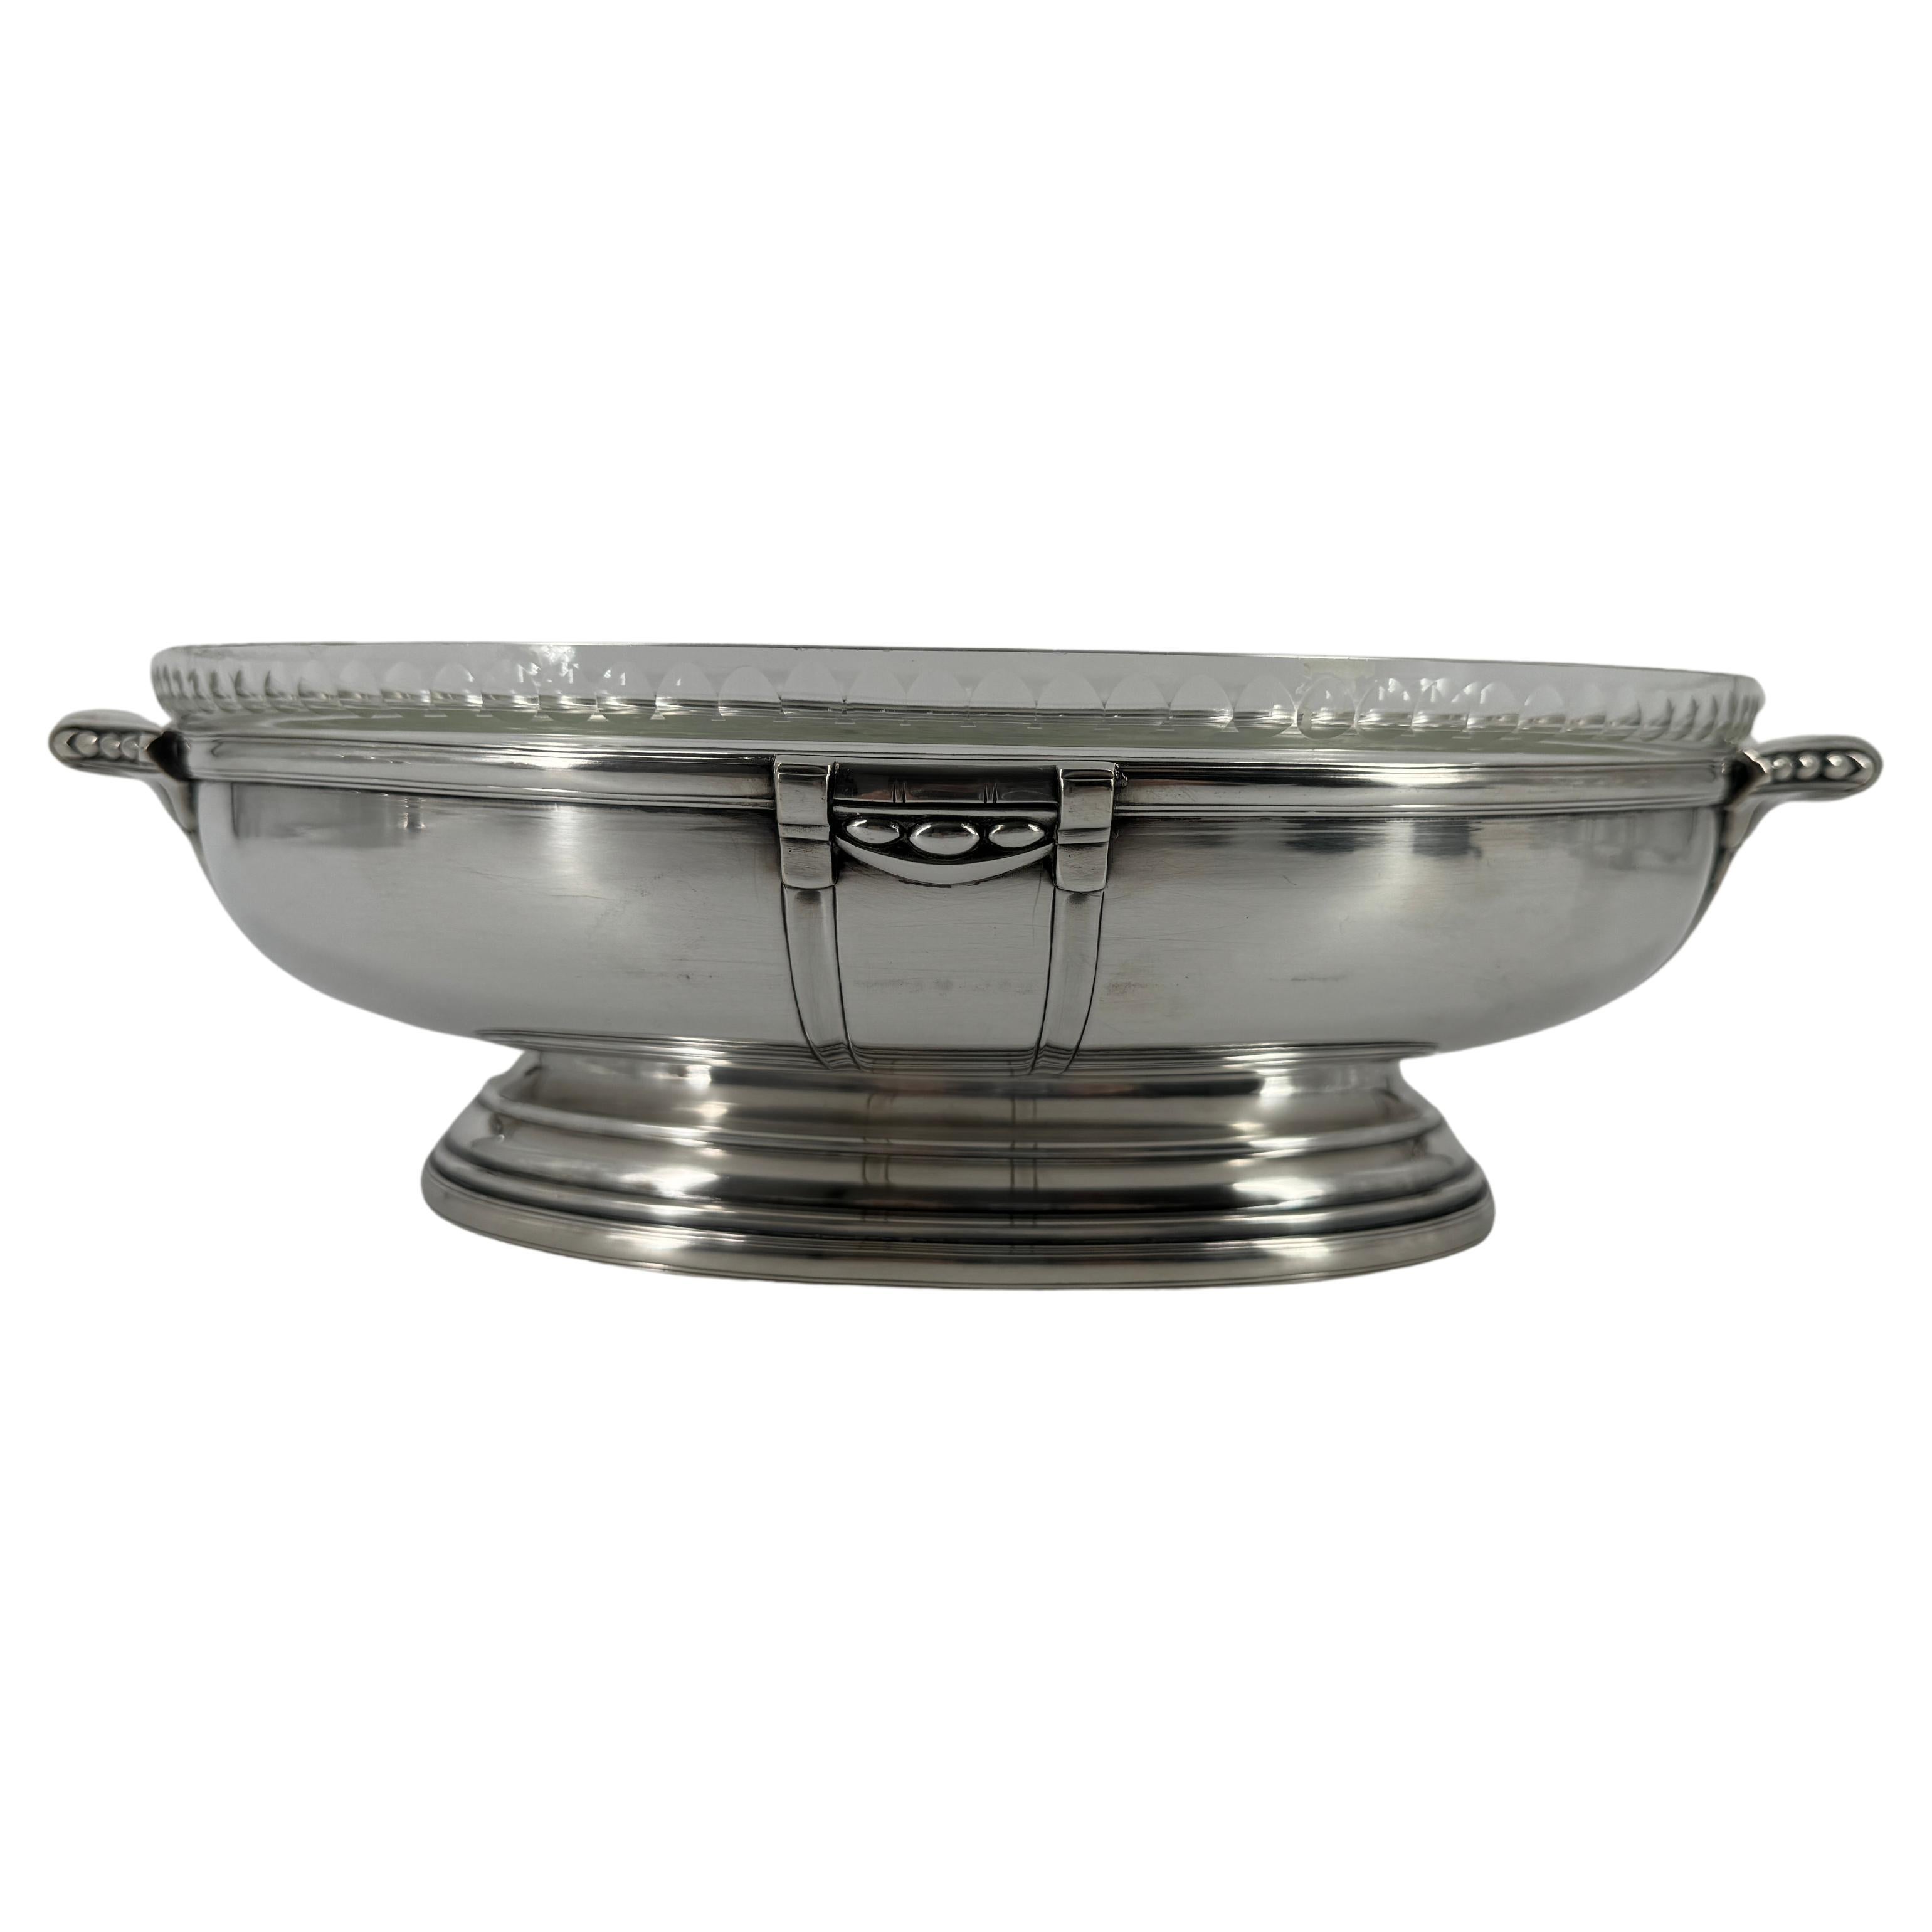 Attributed to Sue et Mare this art deco centre piece is composed of a silver plated oval recipient, and its original cut cristal liner.

The decor is a beautiful example of the French art deco period, circa 1925, and typical of Sue & Mare delicate